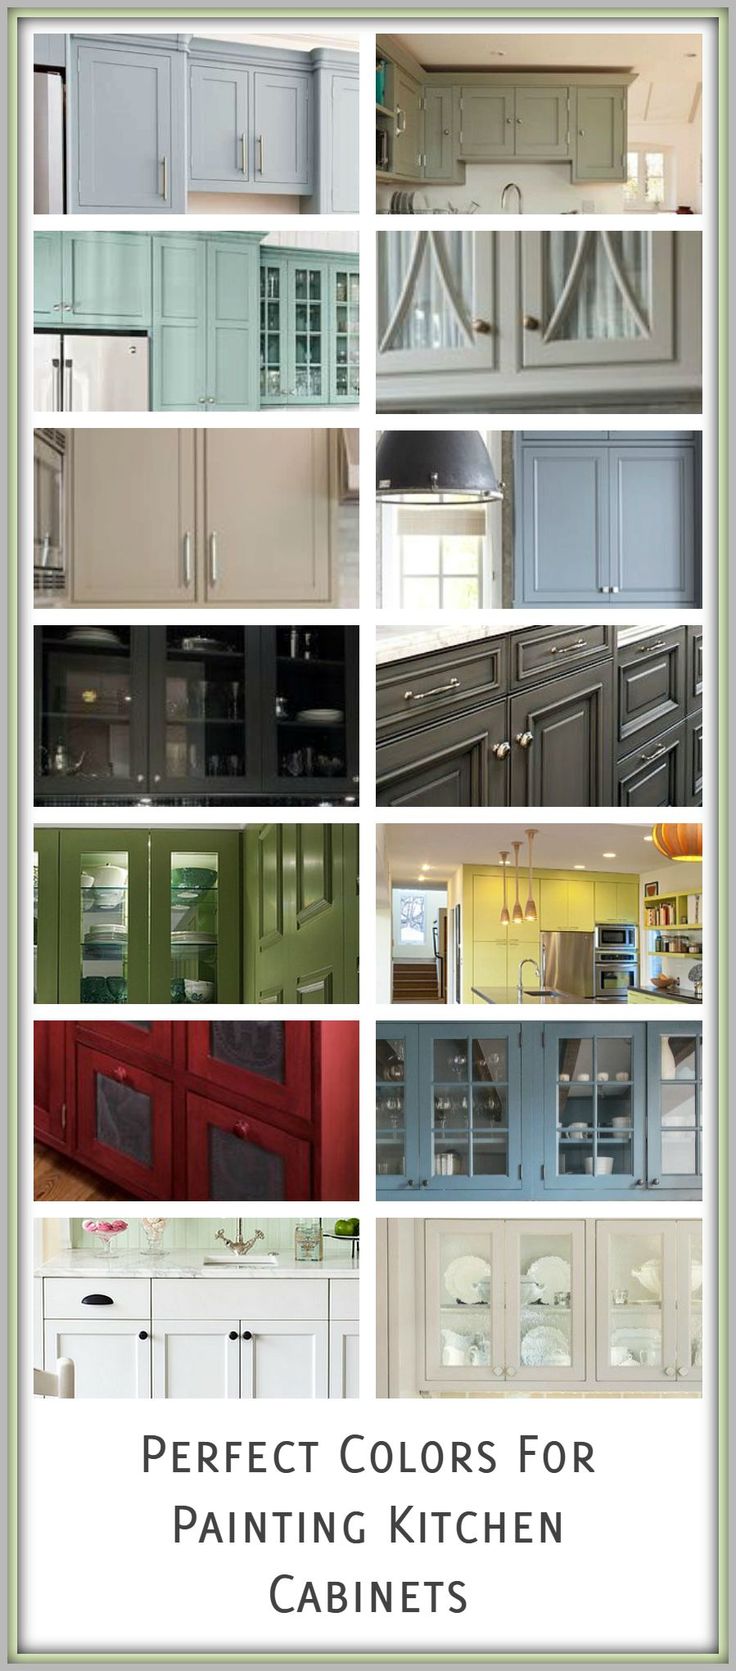 Great Colors for Painting Kitchen Cabinets